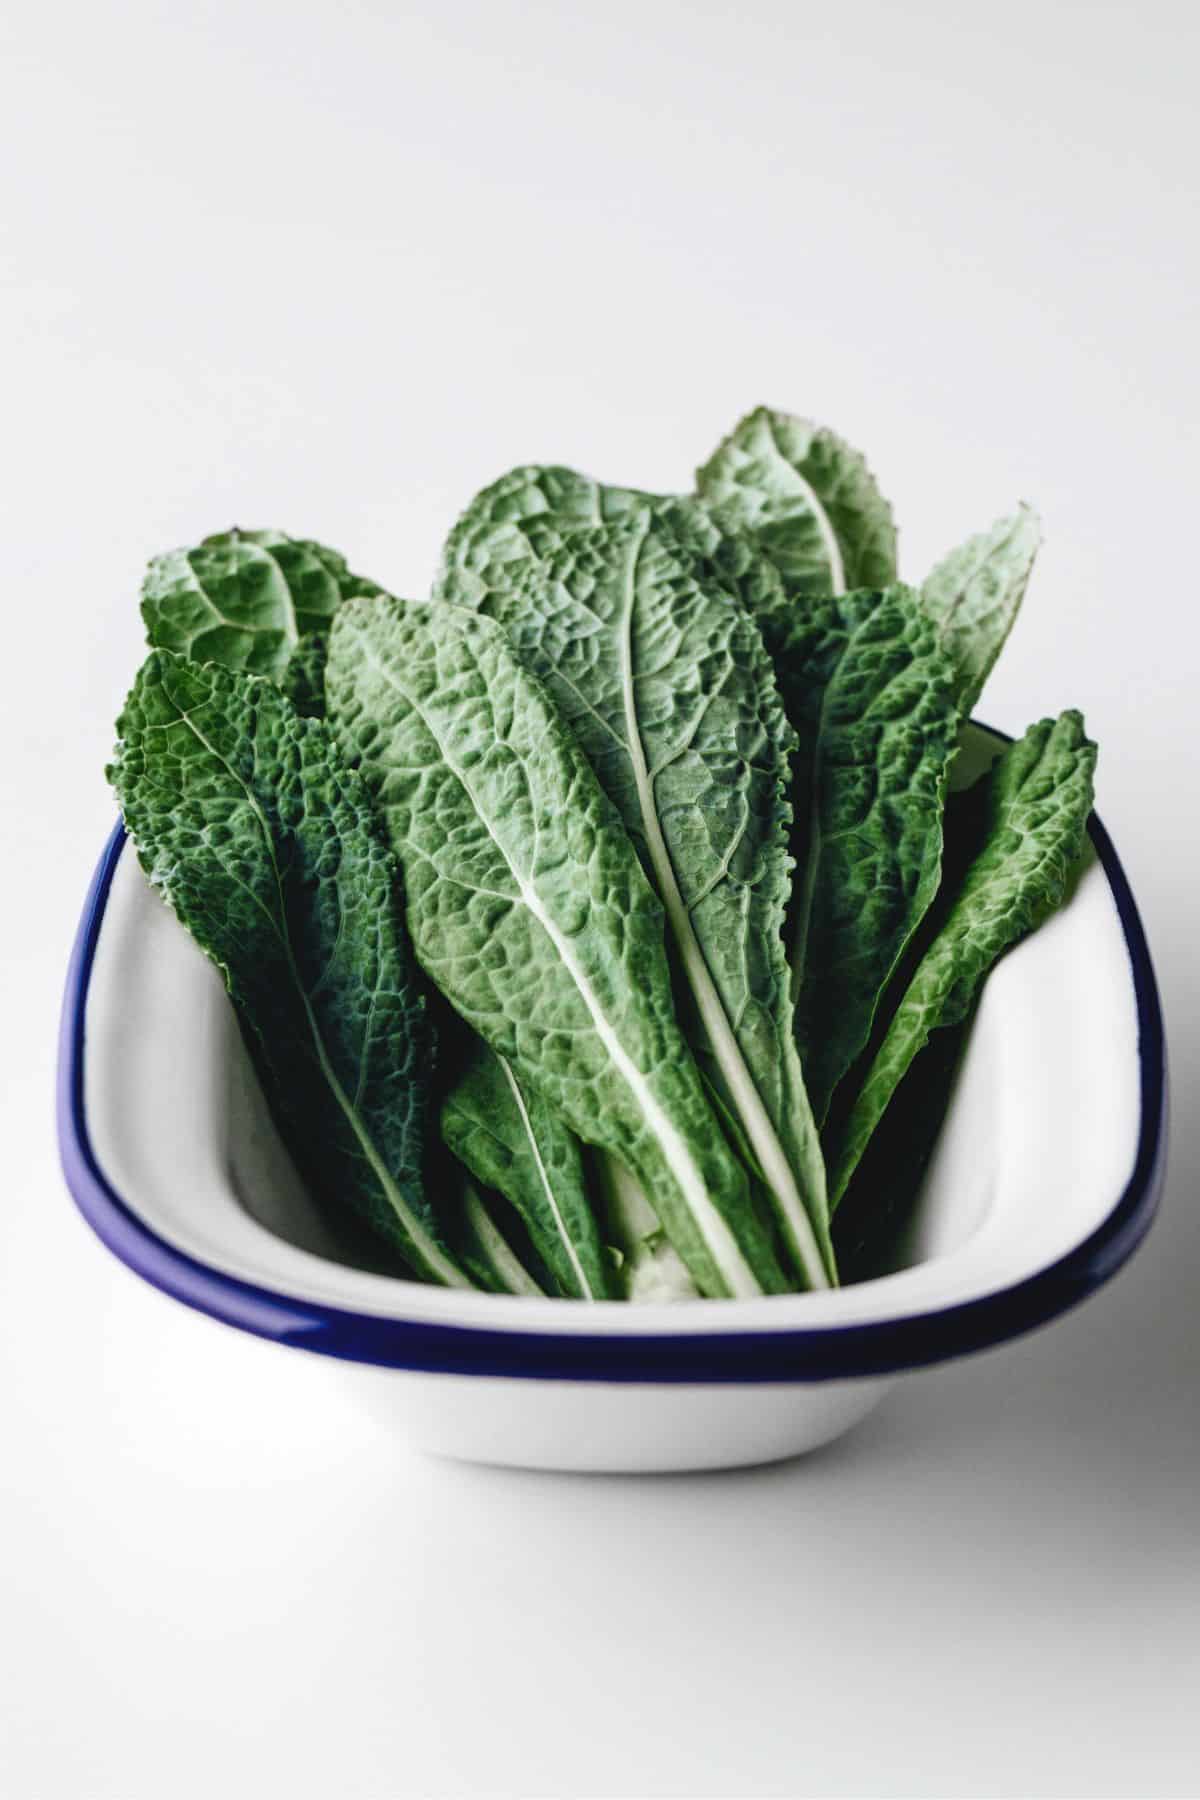 Bowl of kale leaves on white surface.